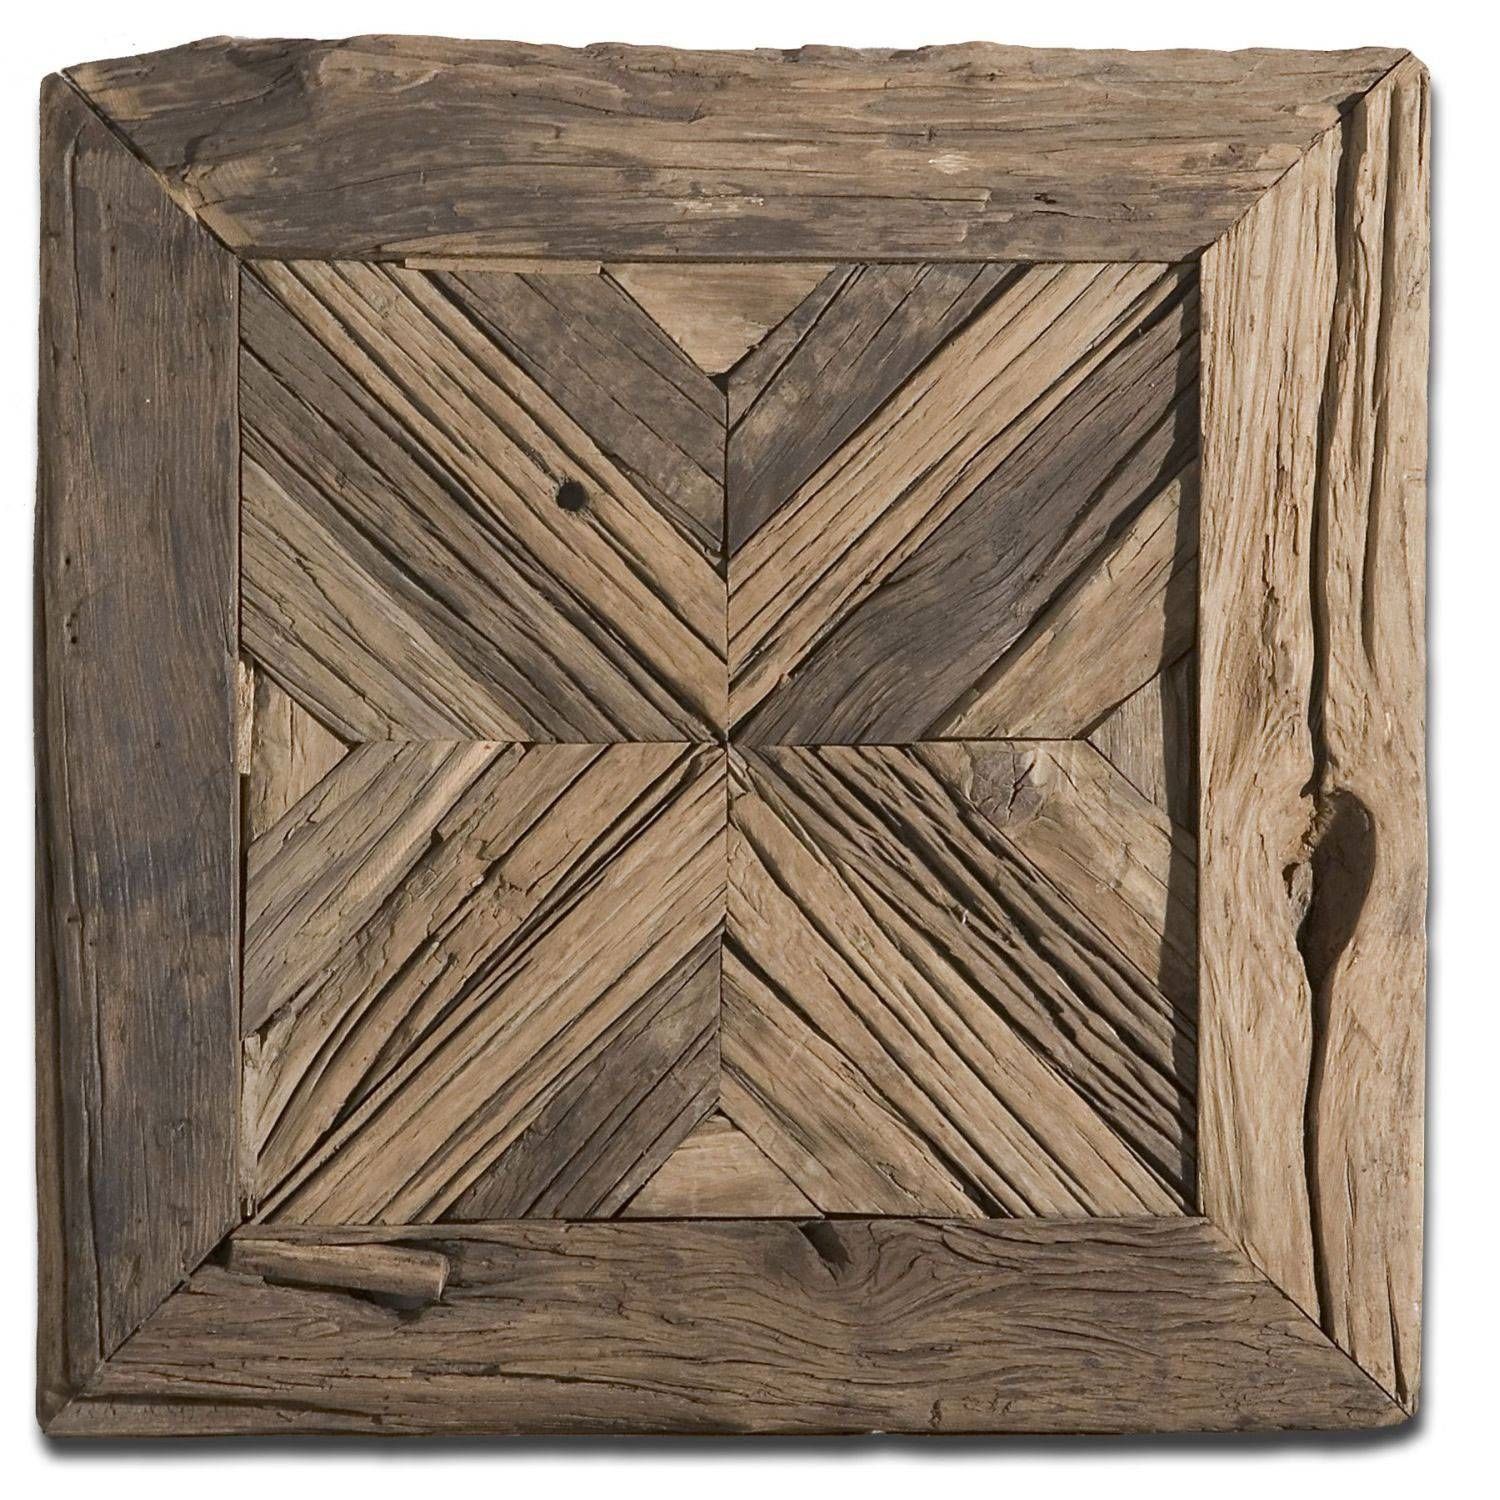 Rennick Rustic Wood Wall Art Uttermost Wall Sculpture Wall Decor With Regard To Most Recently Released Wood Wall Art (Gallery 25 of 25)